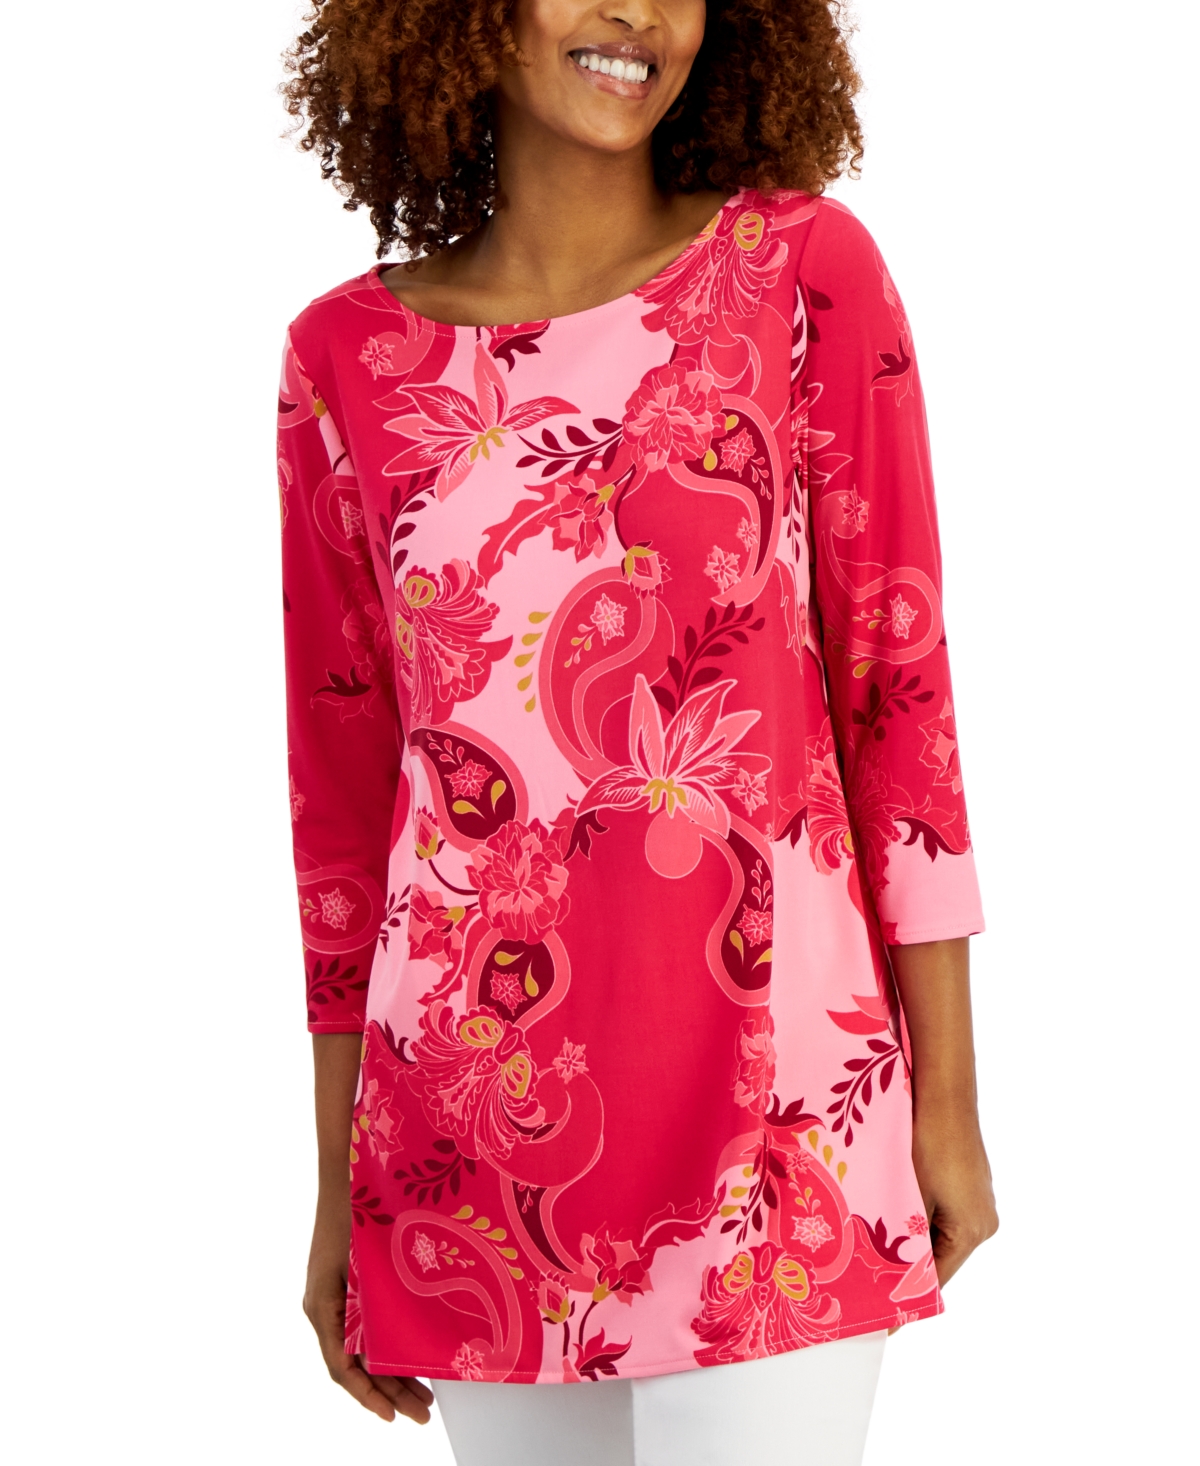 Petite Glamorous Garden 3/4-Sleeve Boat-Neck Top, Created for Macy's - Claret Rose Combo